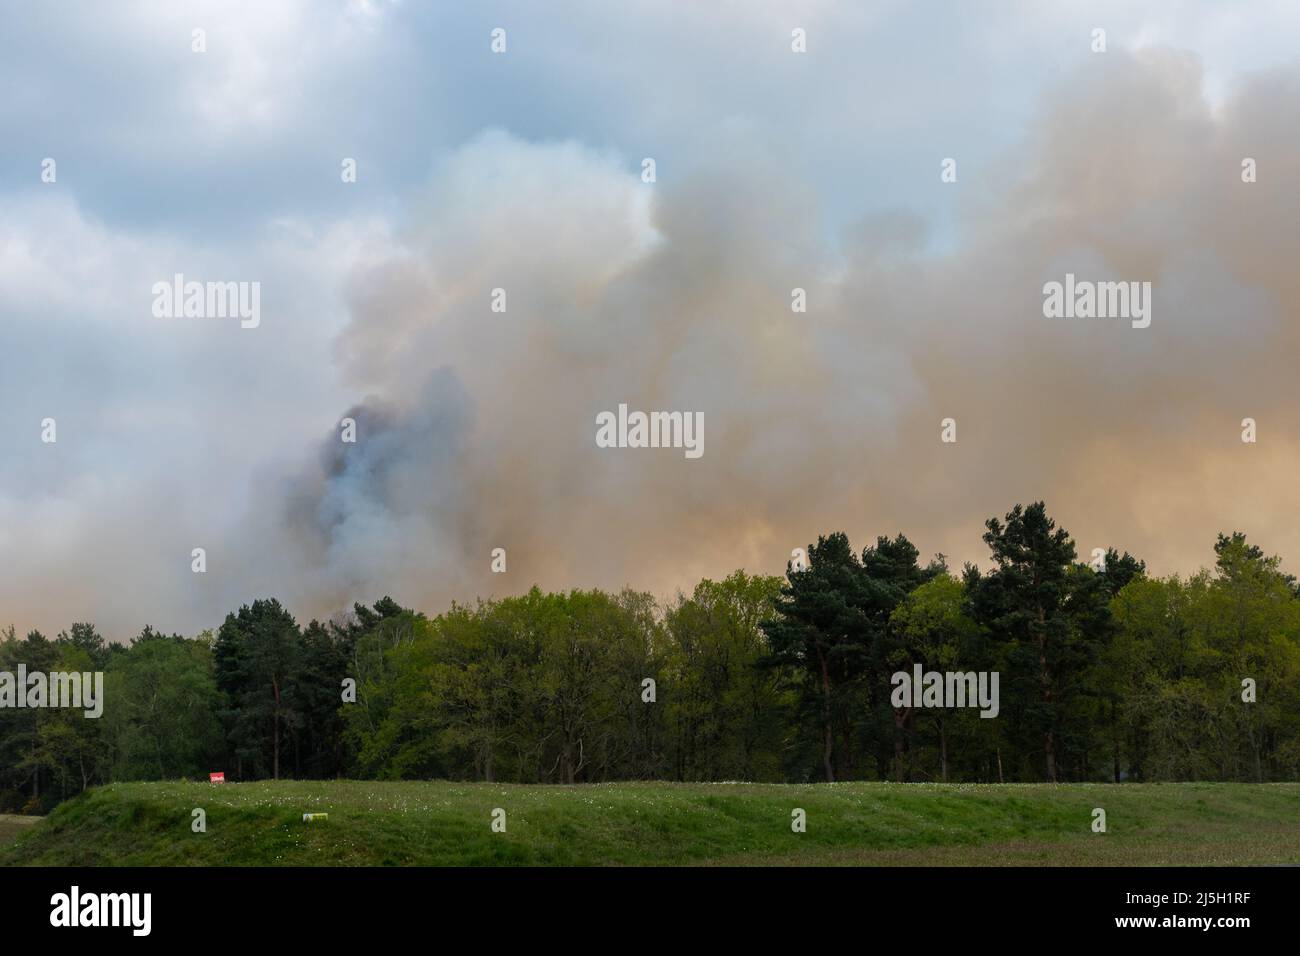 Ash Ranges, Surrey, England, UK. 23rd April 2022. A large heath fire has broken out on Ash Ranges, which a heathland nature reserve west of Pirbright in Surrey. It is owned by the Ministry of Defence and managed by the Surrey Wildlife Trust. Stock Photo